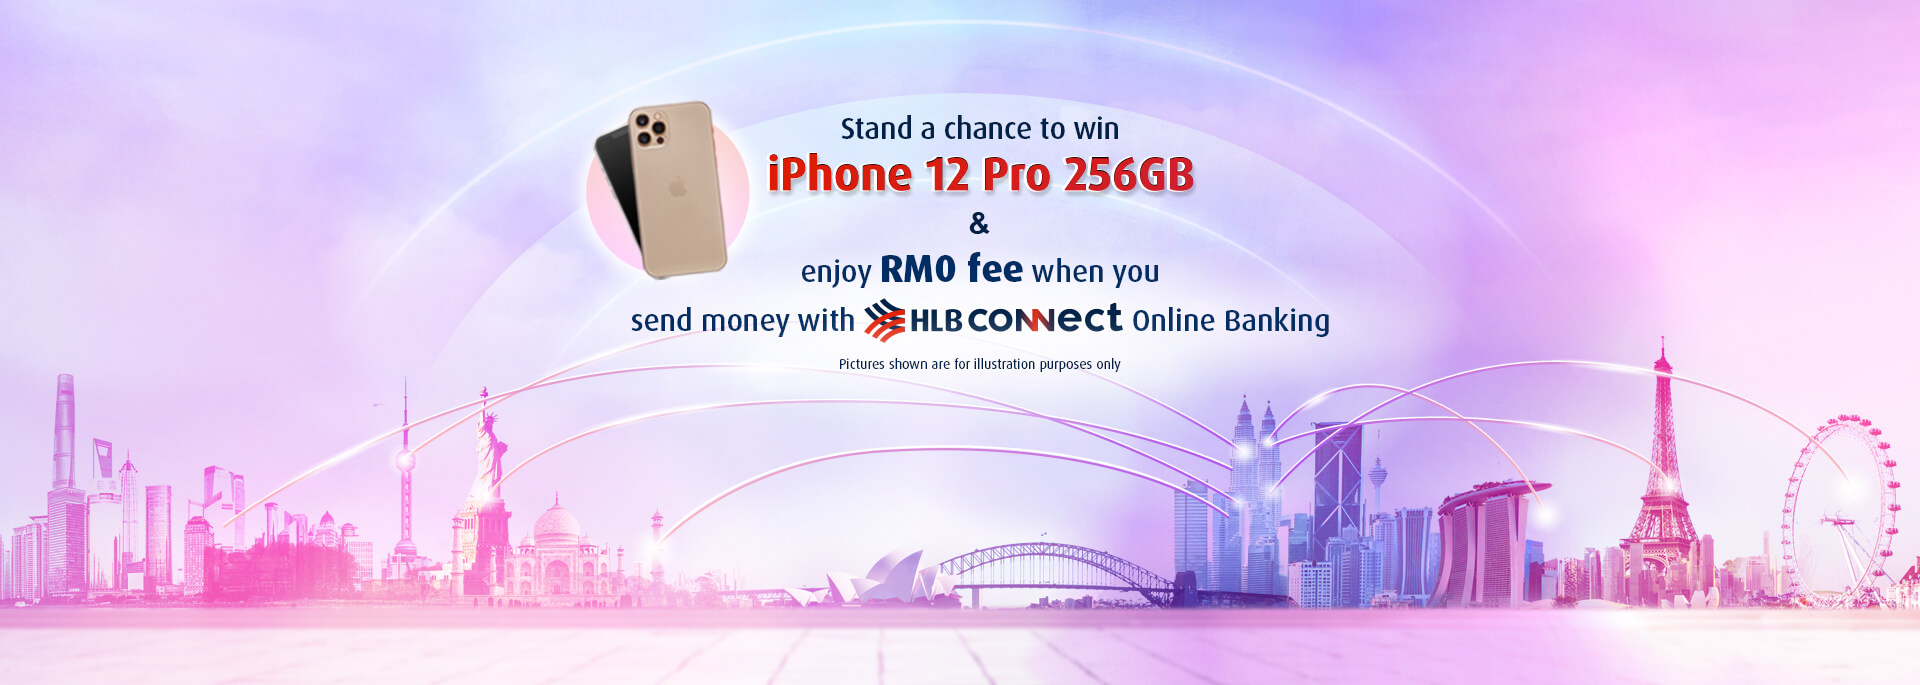 Wow! Send money abroad and get a chance to win